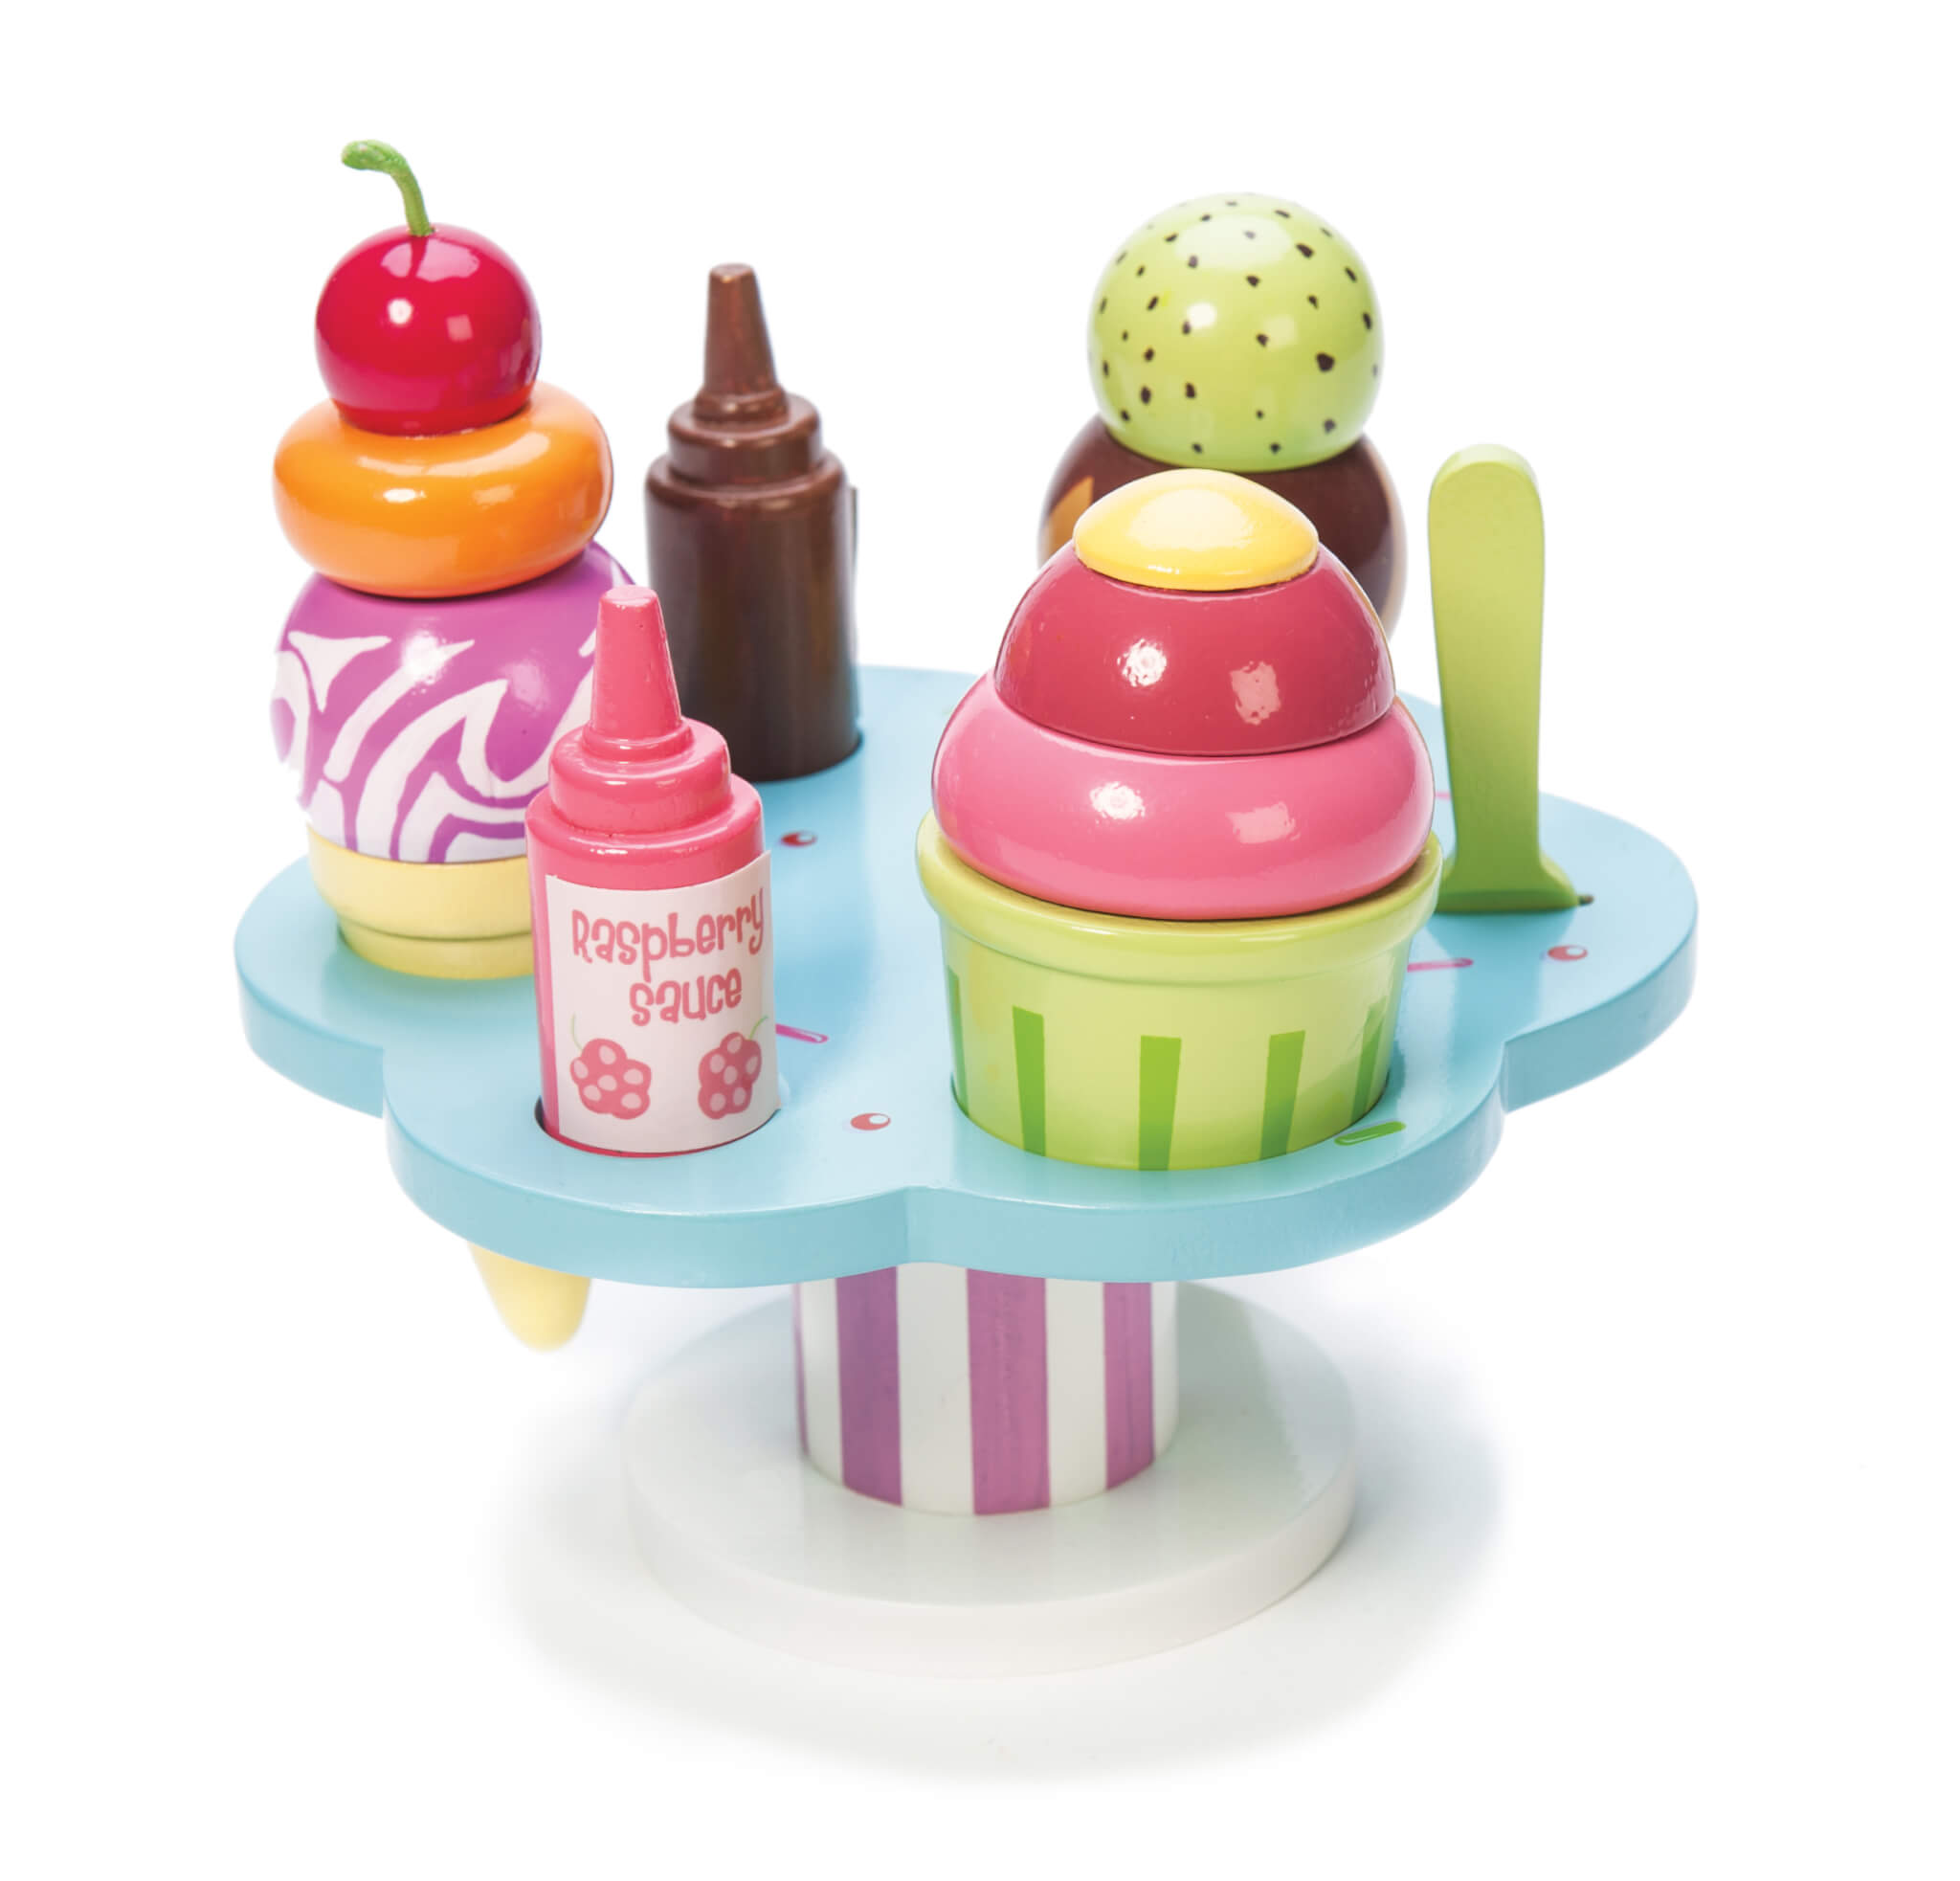 Educational Wooden Toy Honeybake Colourful Wooden Carlo's Gelato Details about   Le Toy Van 